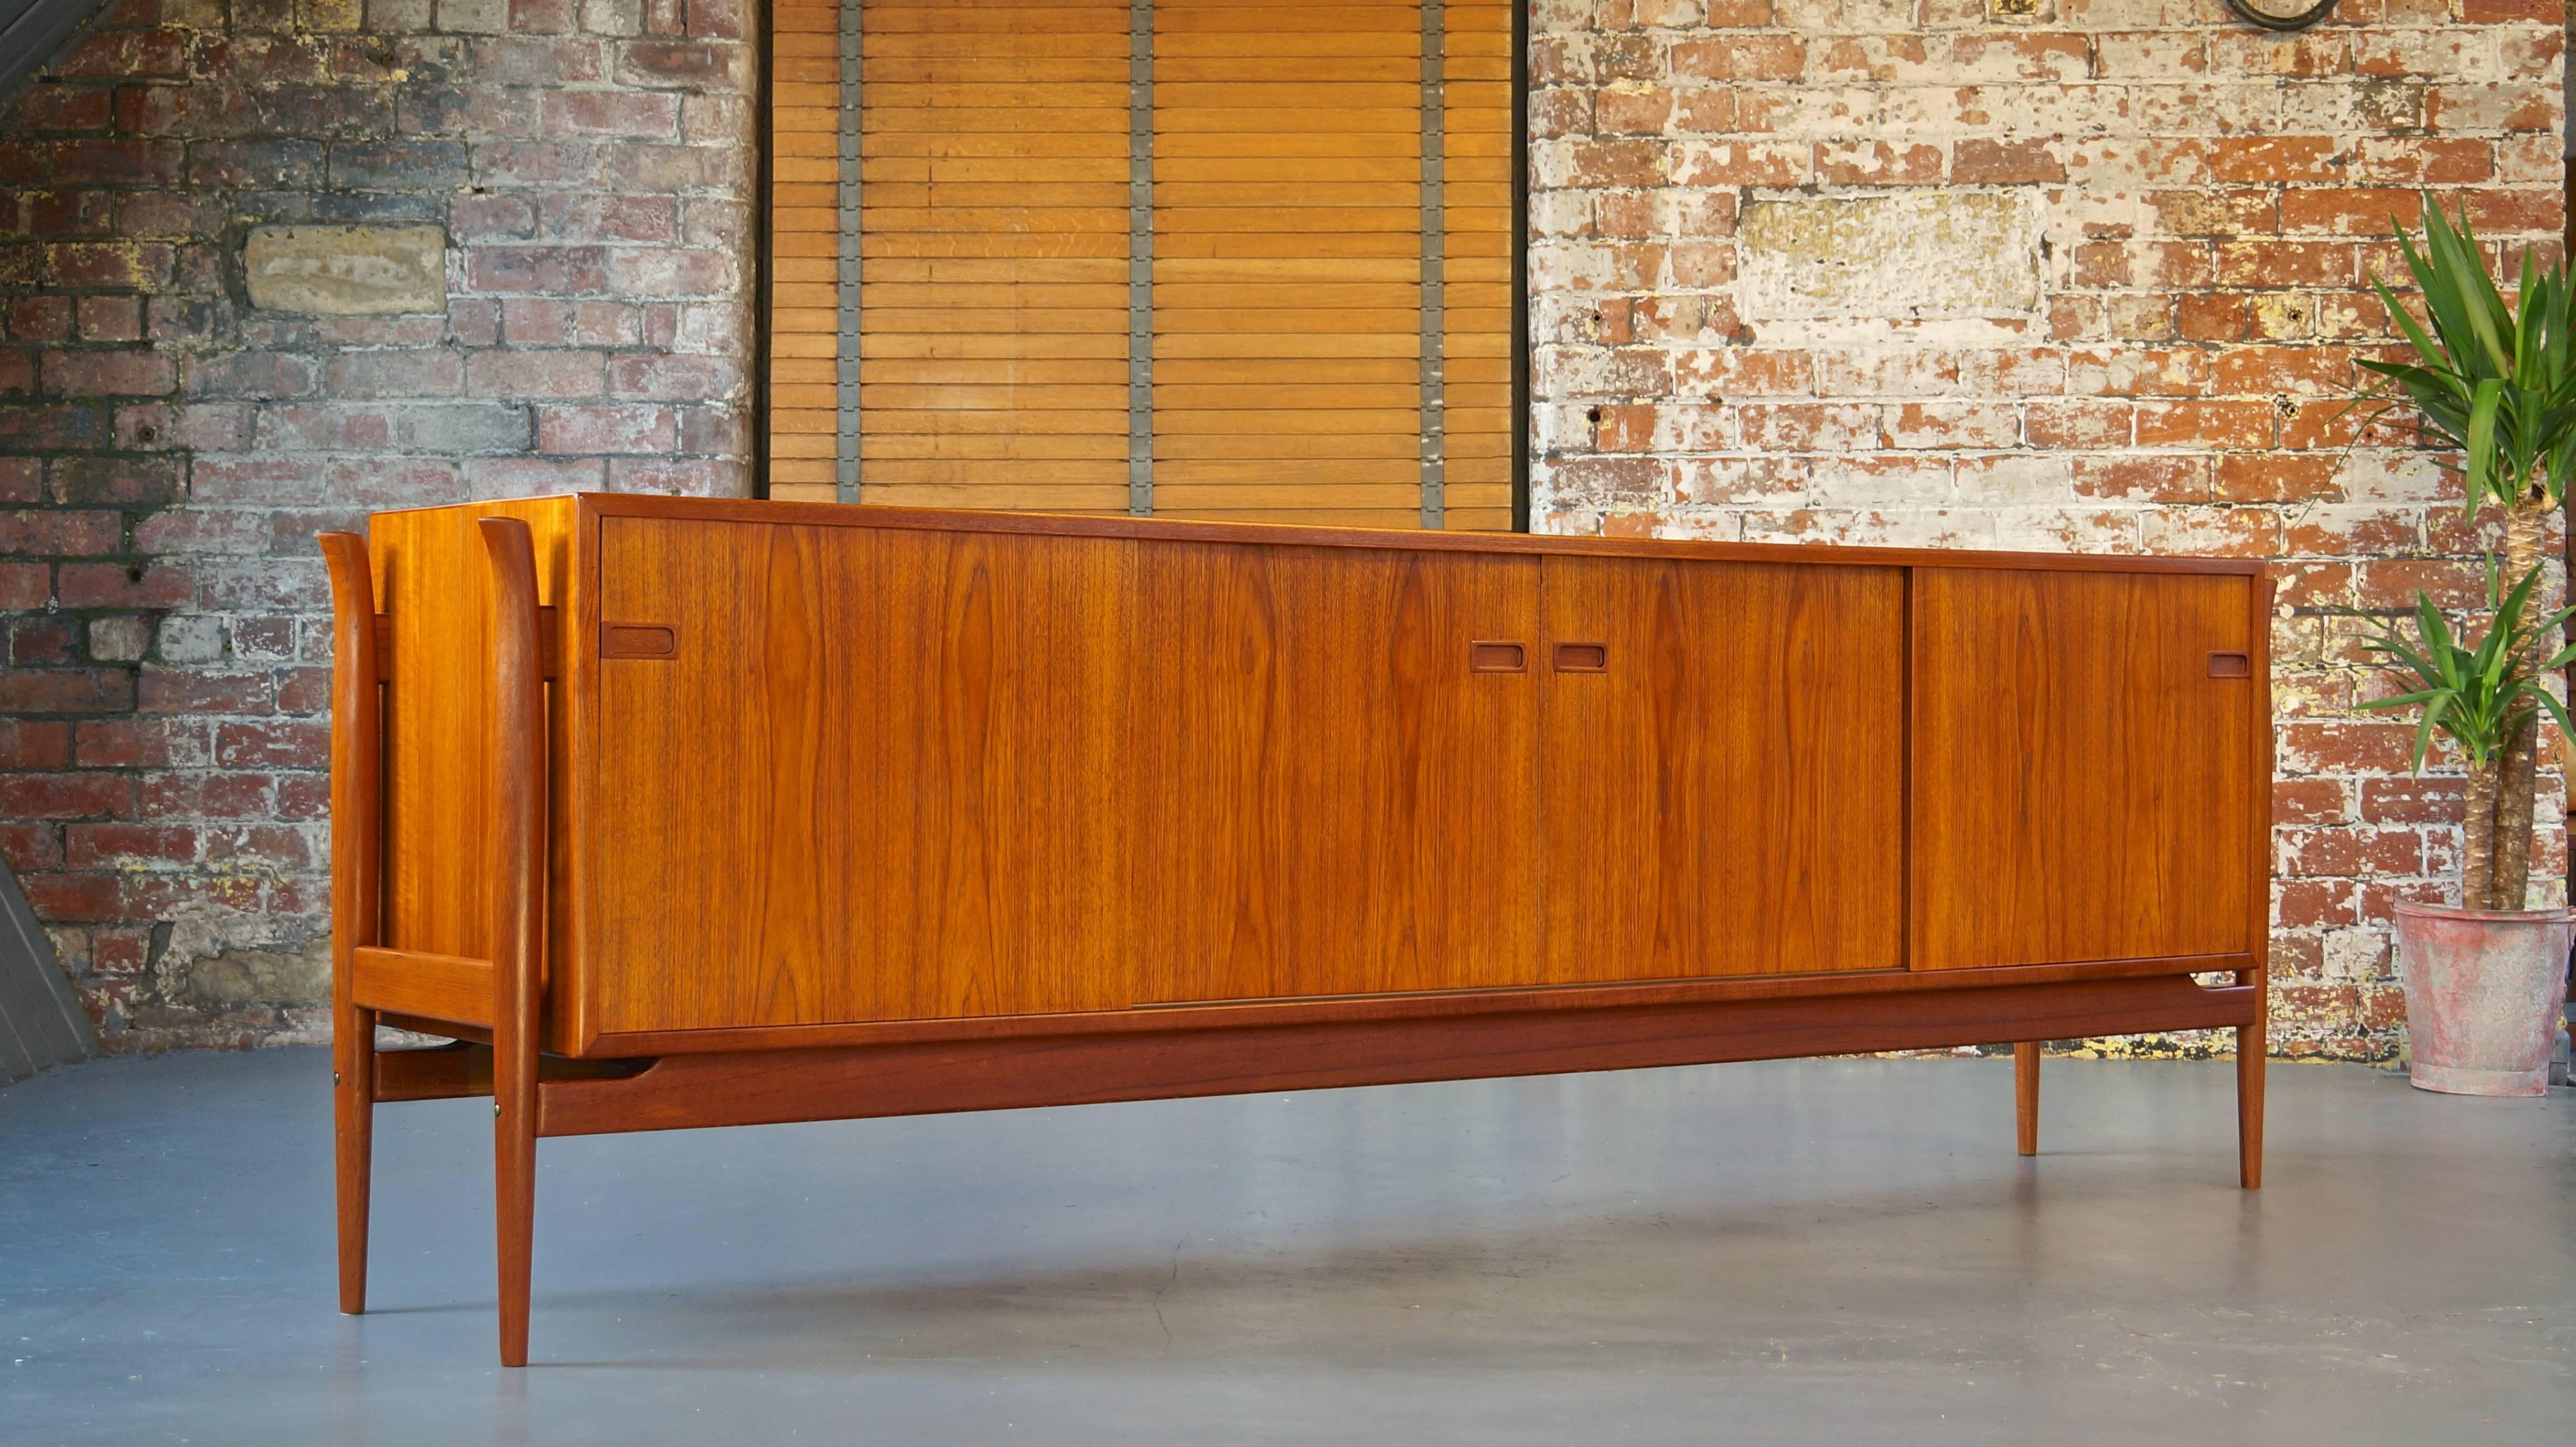 1960s vintage Danish teak sideboard or credenza, extra long and low

Exceptionally high quality with a very unique design.

More details and images to follow shortly.